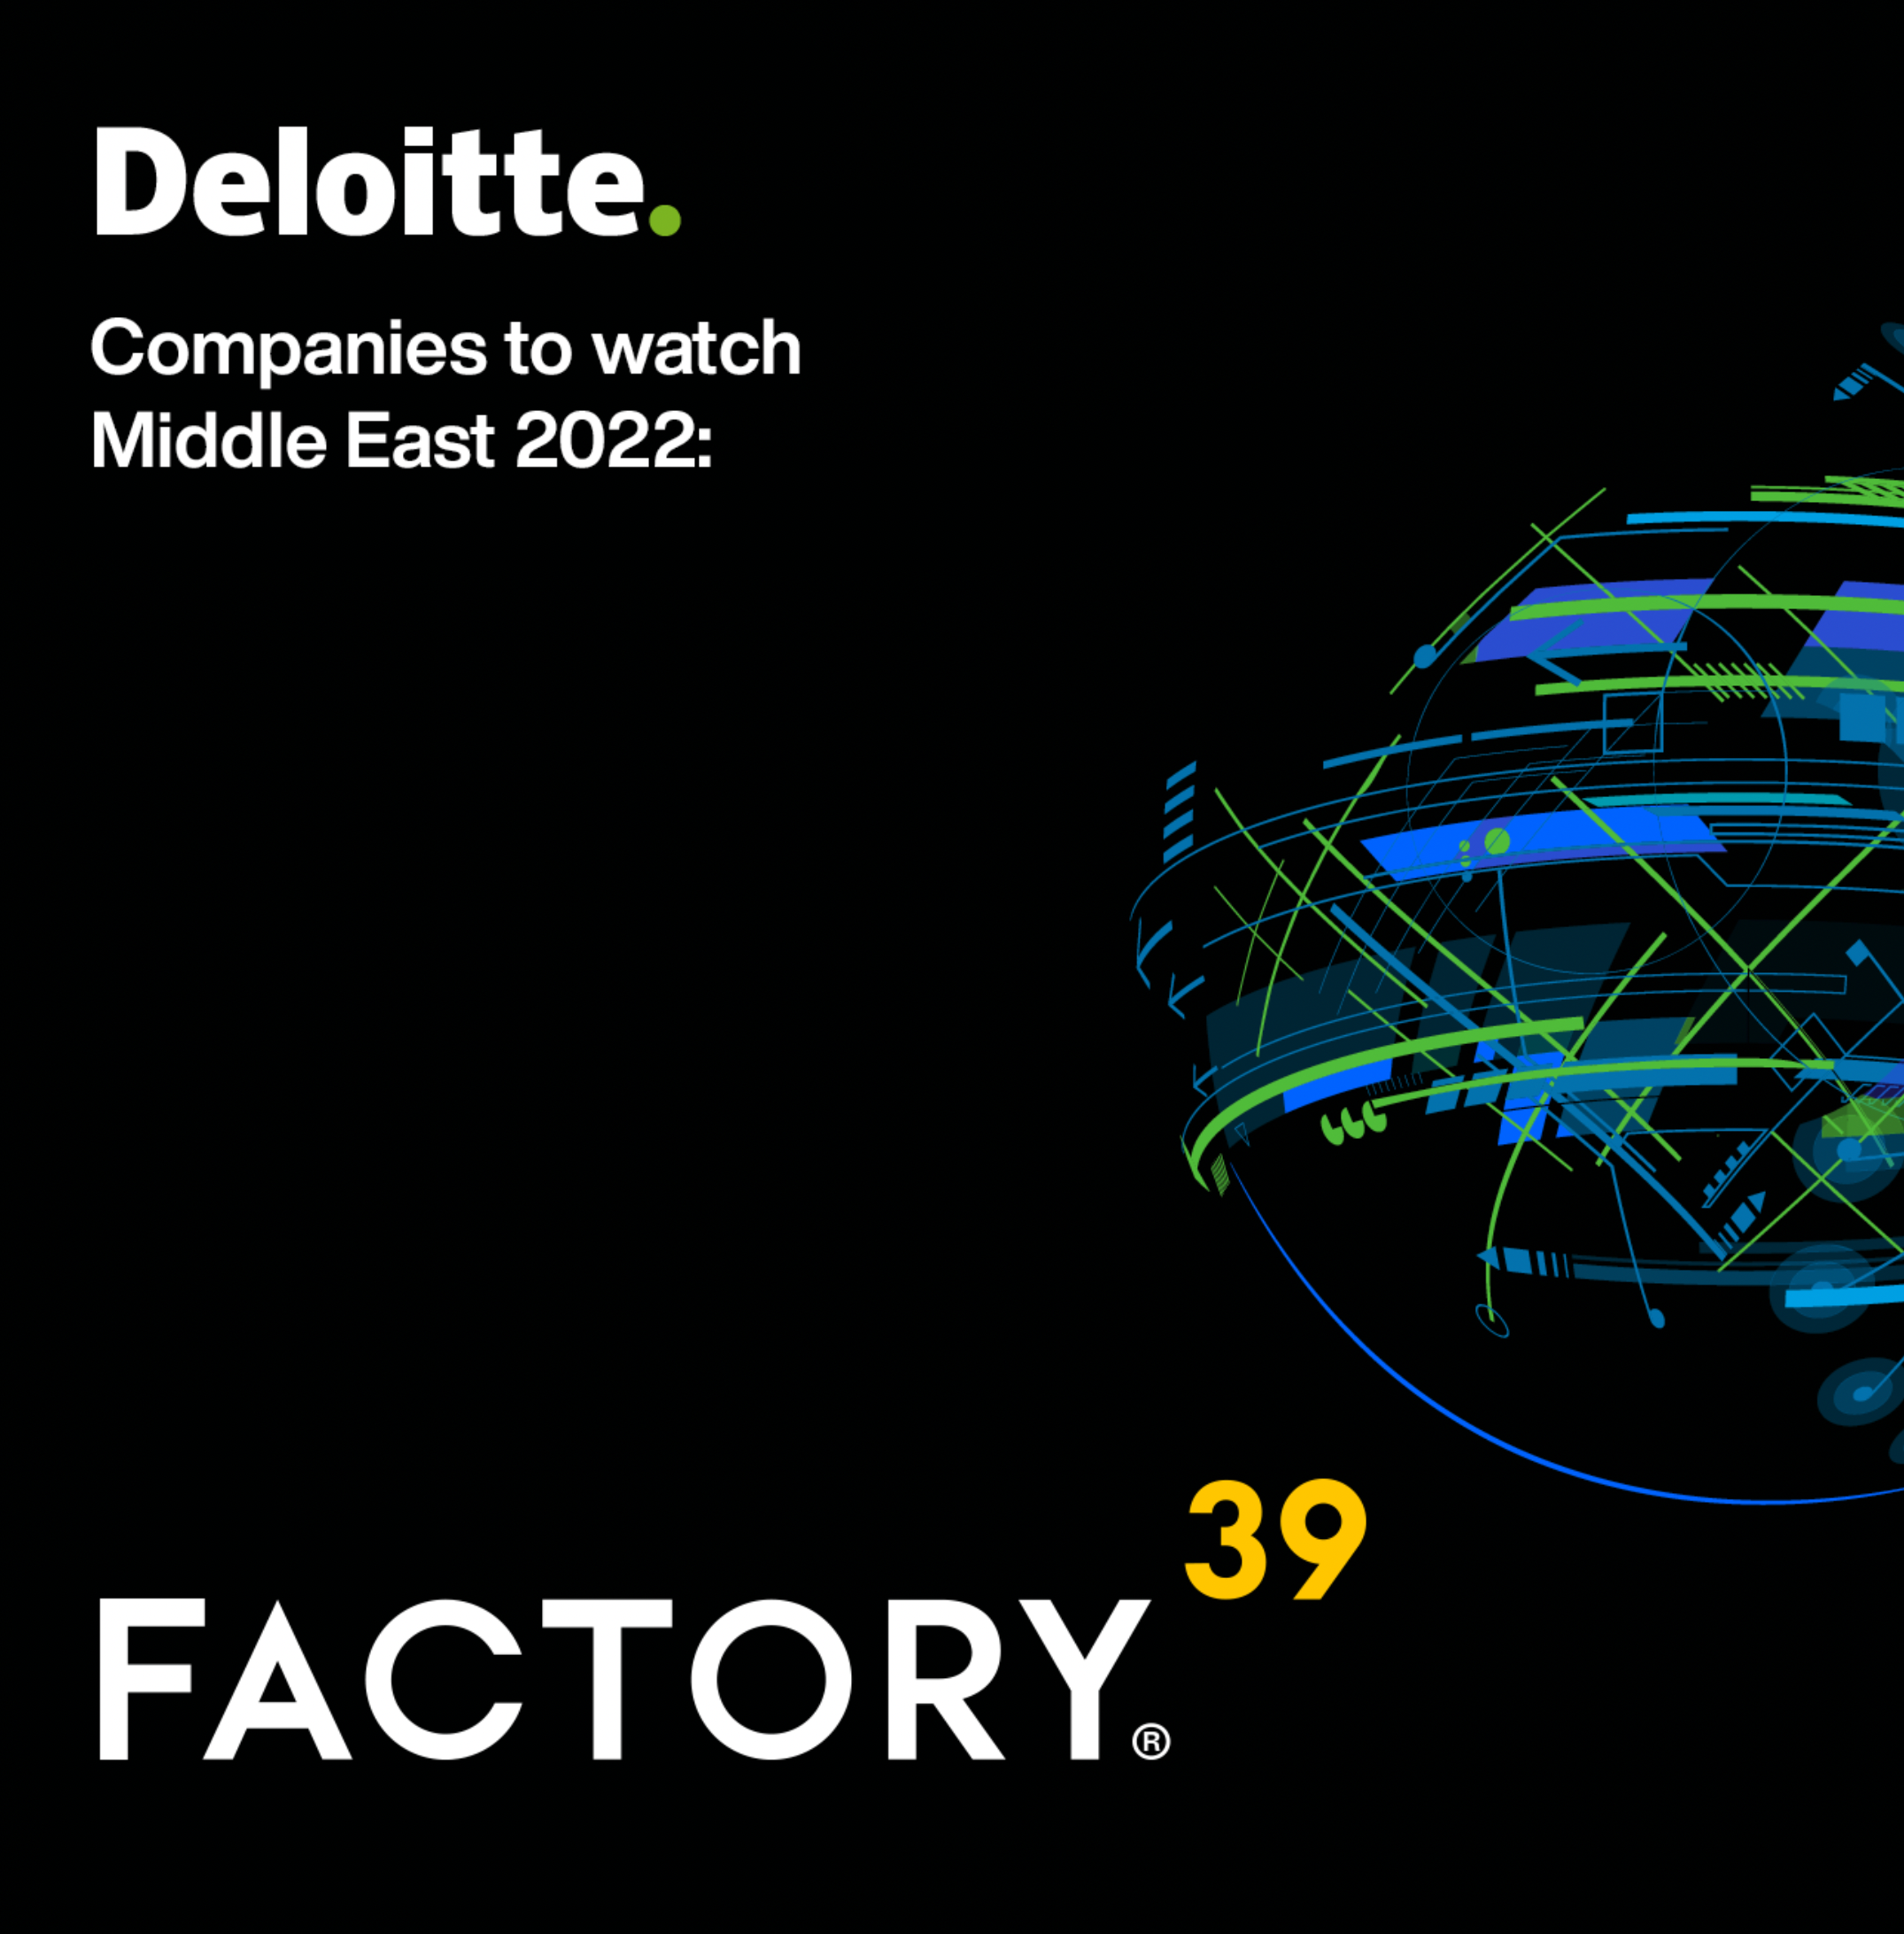 Deloitte Fast 50: Cyprus based Factory 39 has made it into the "Companies to Watch" section